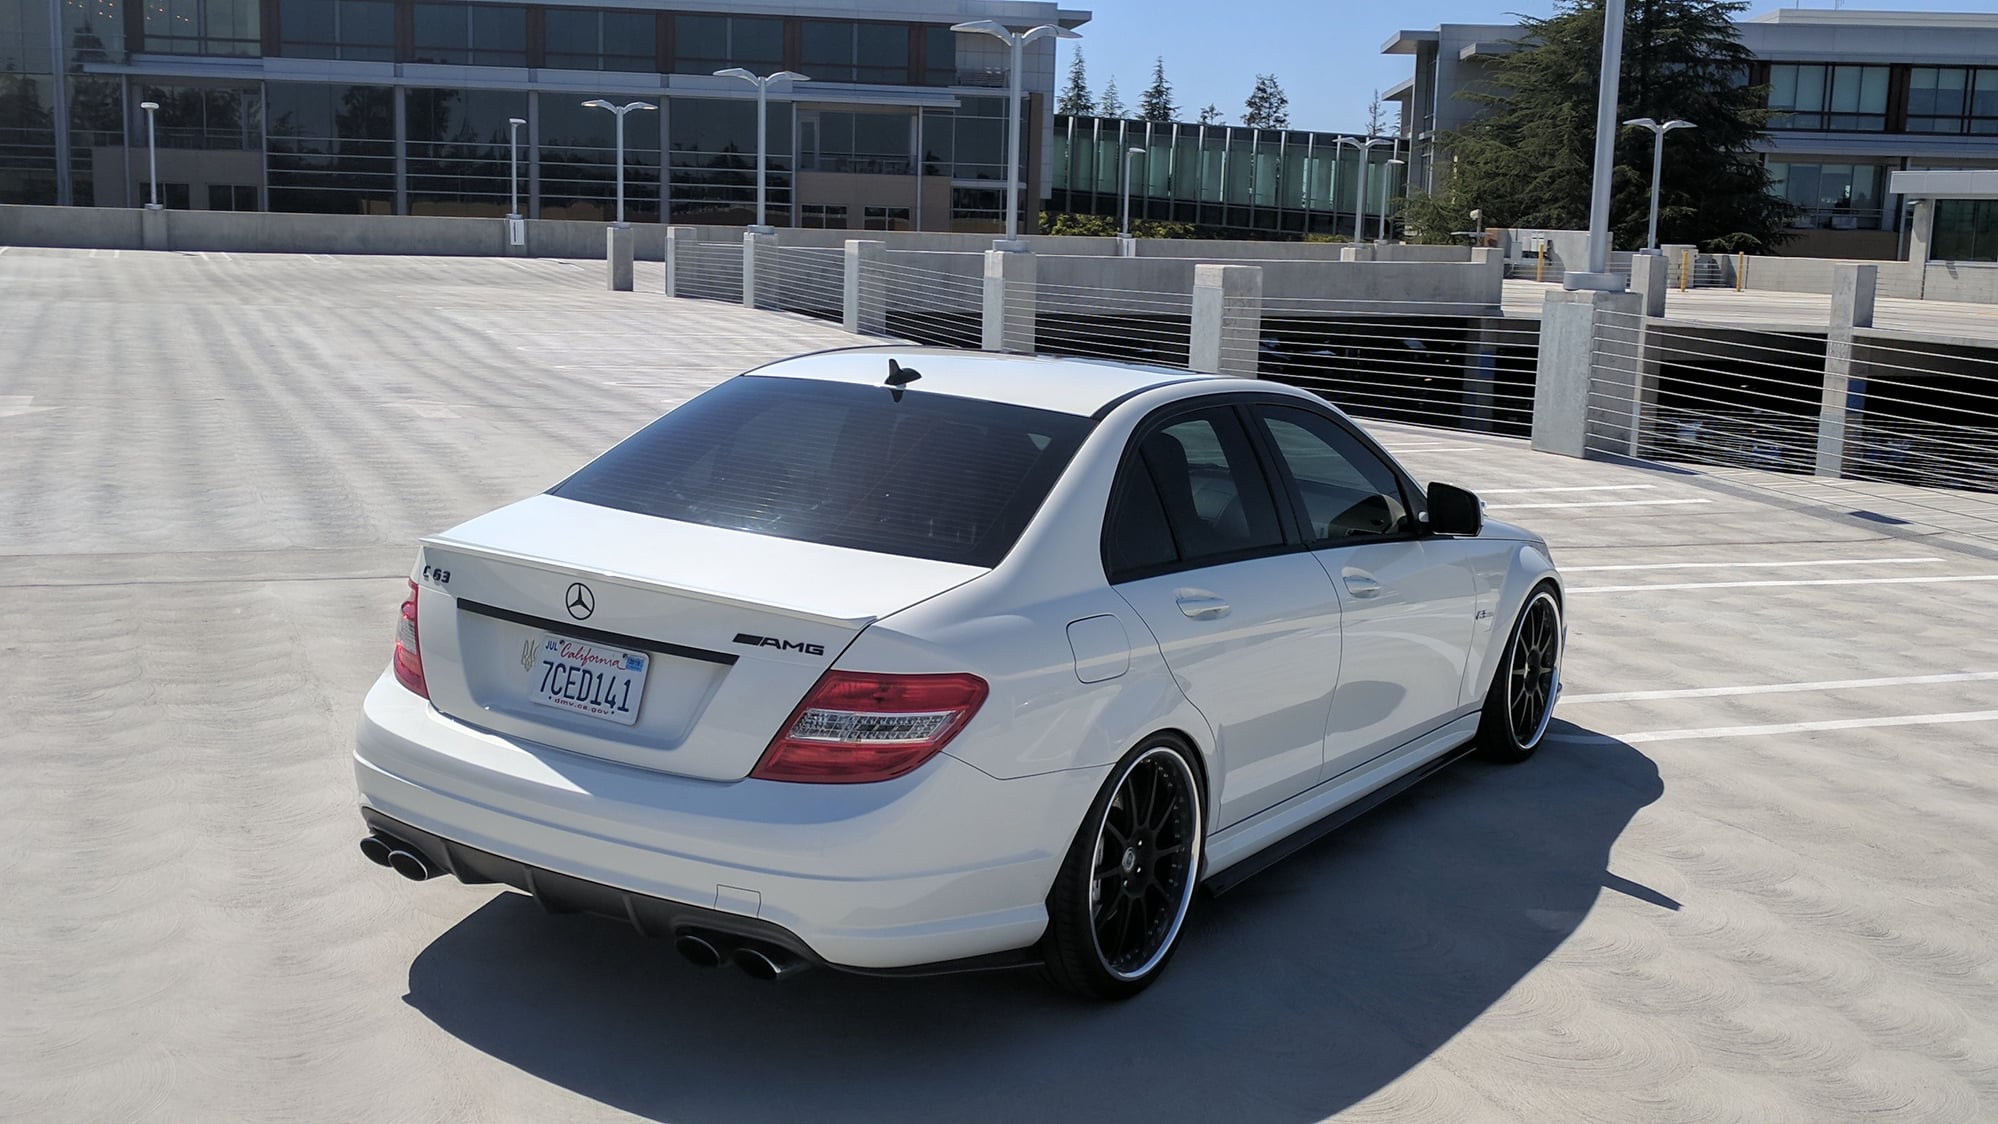 2009 Mercedes-Benz C63 AMG - 2009 C63 AMG P30 package (+warranty) - Used - VIN WDDGF77X89F282316 - 64,500 Miles - 8 cyl - 2WD - Automatic - Sedan - White - Campbell, CA 95008, United States